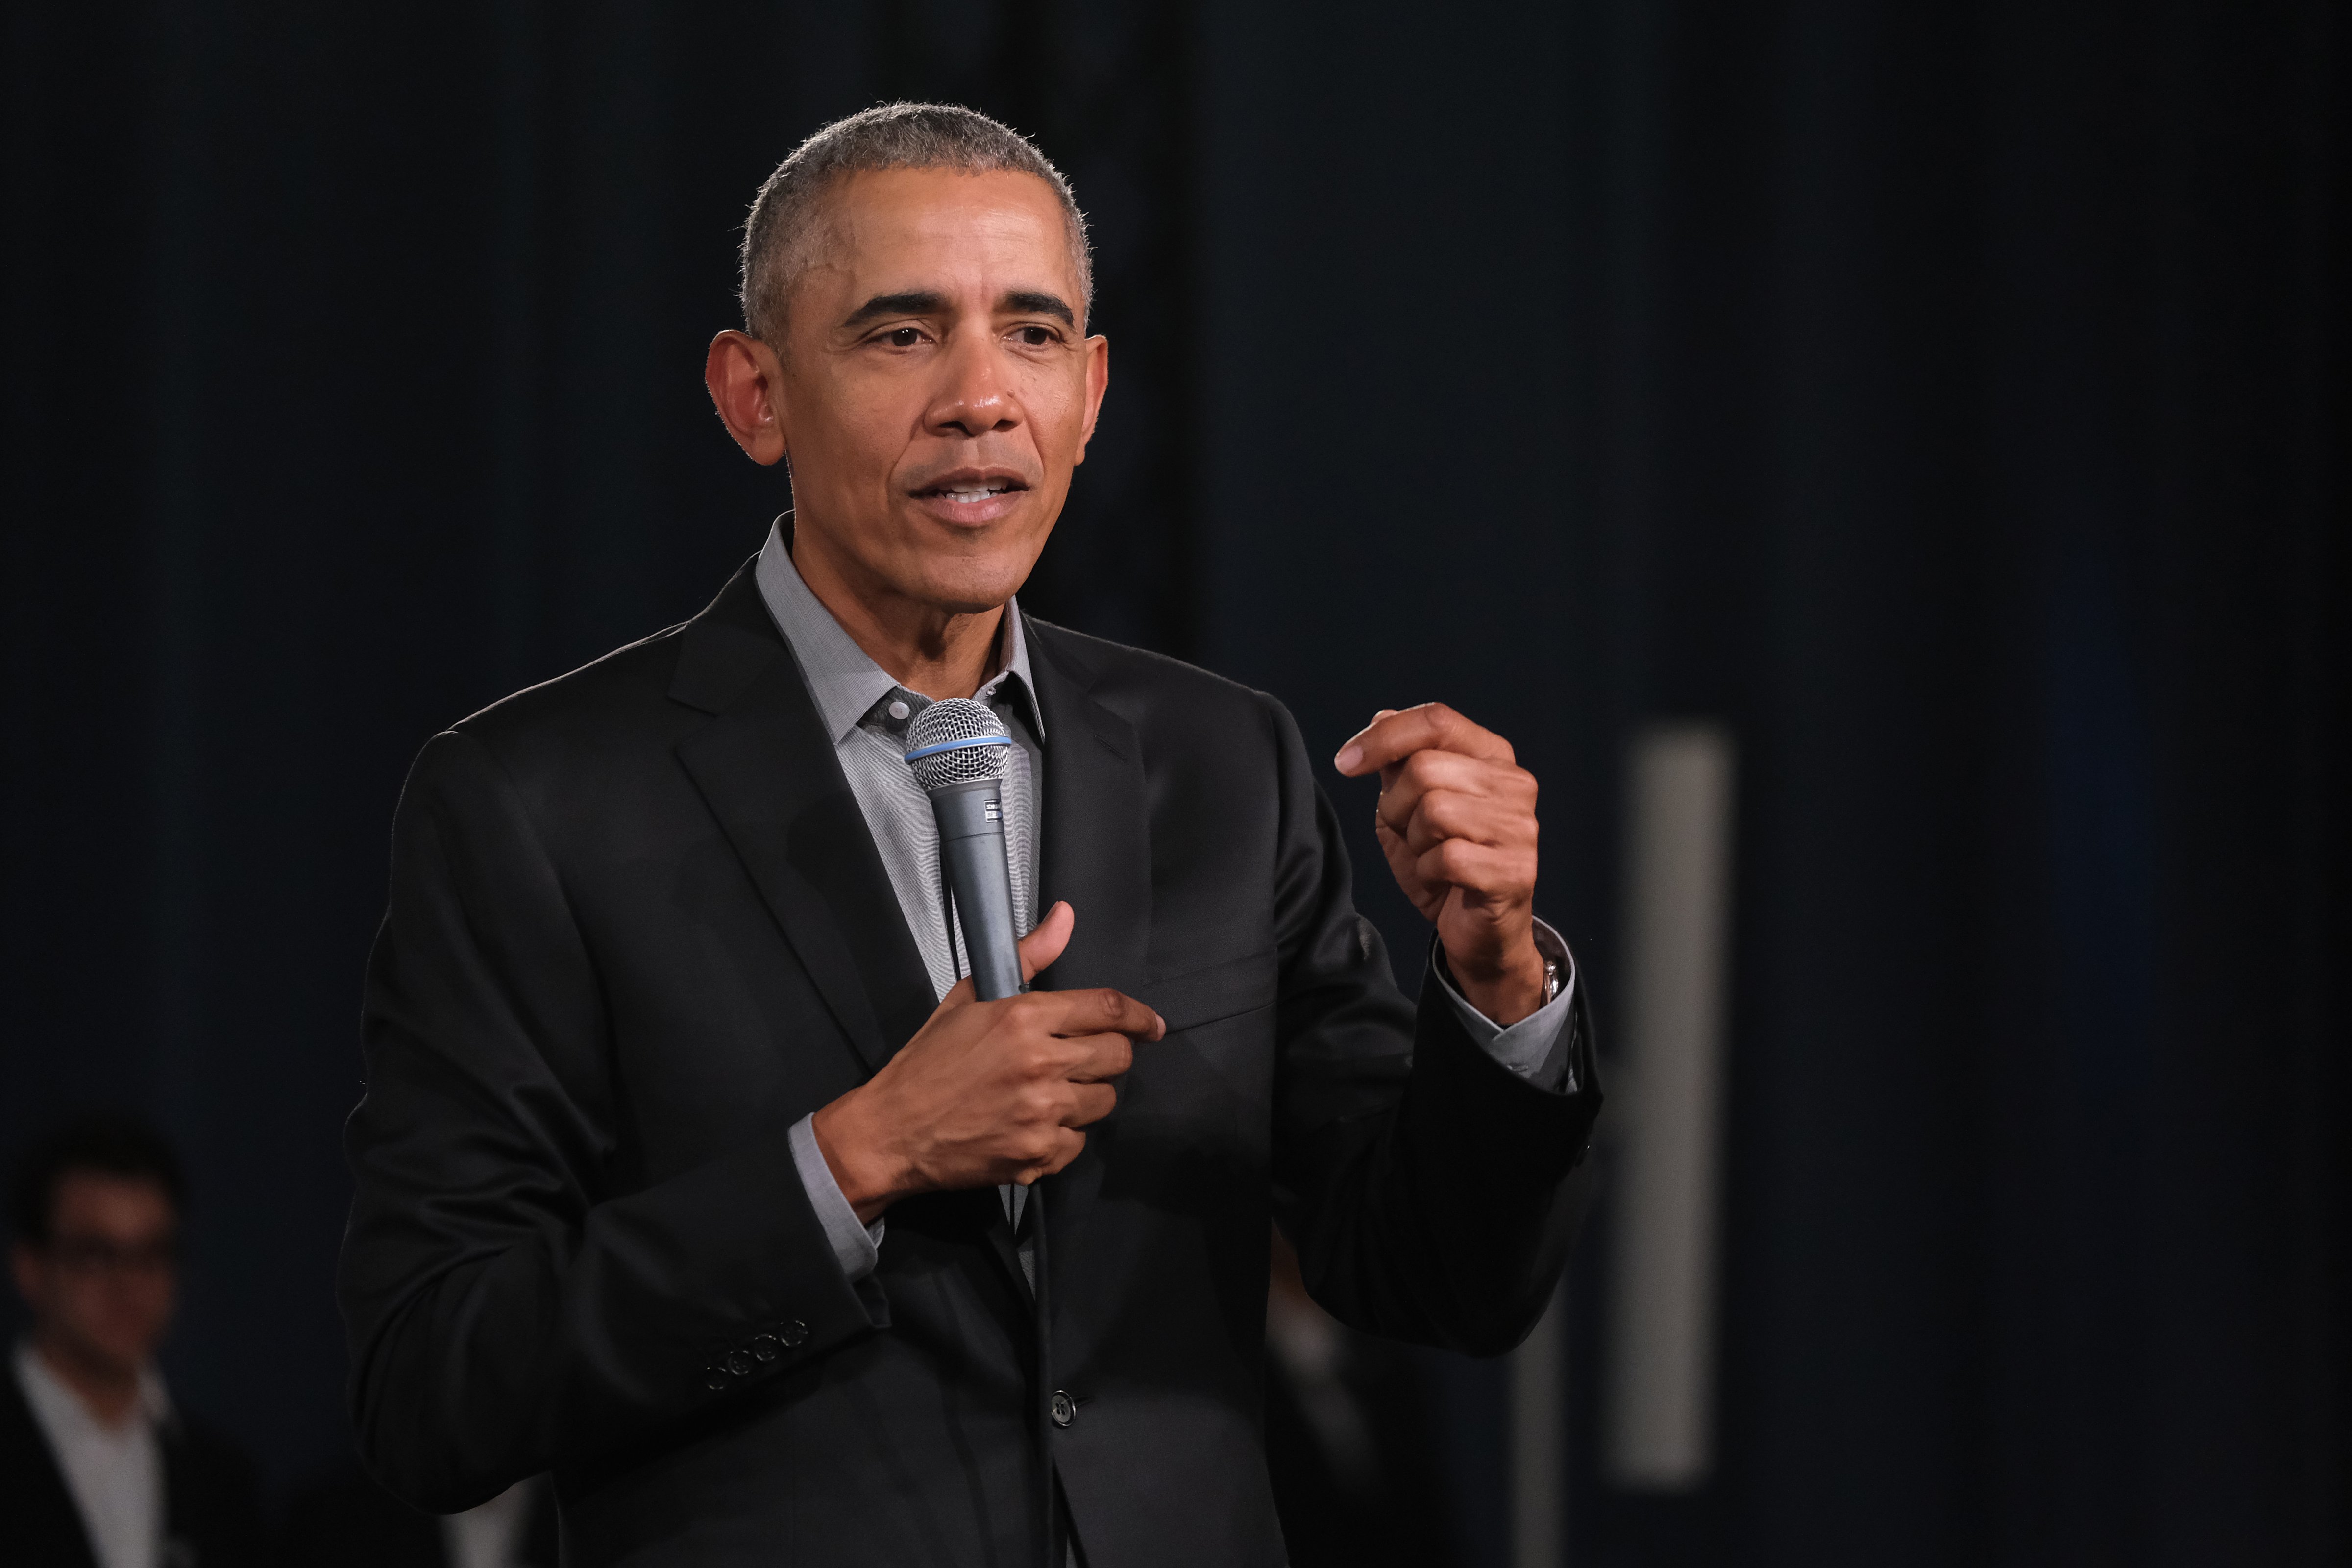 Former U.S. President Barack Obama speaks to young leaders from across Europe in a Town Hall-styled session on April 06, 2019 in Berlin, Germany. (Sean Gallup—Getty Images)